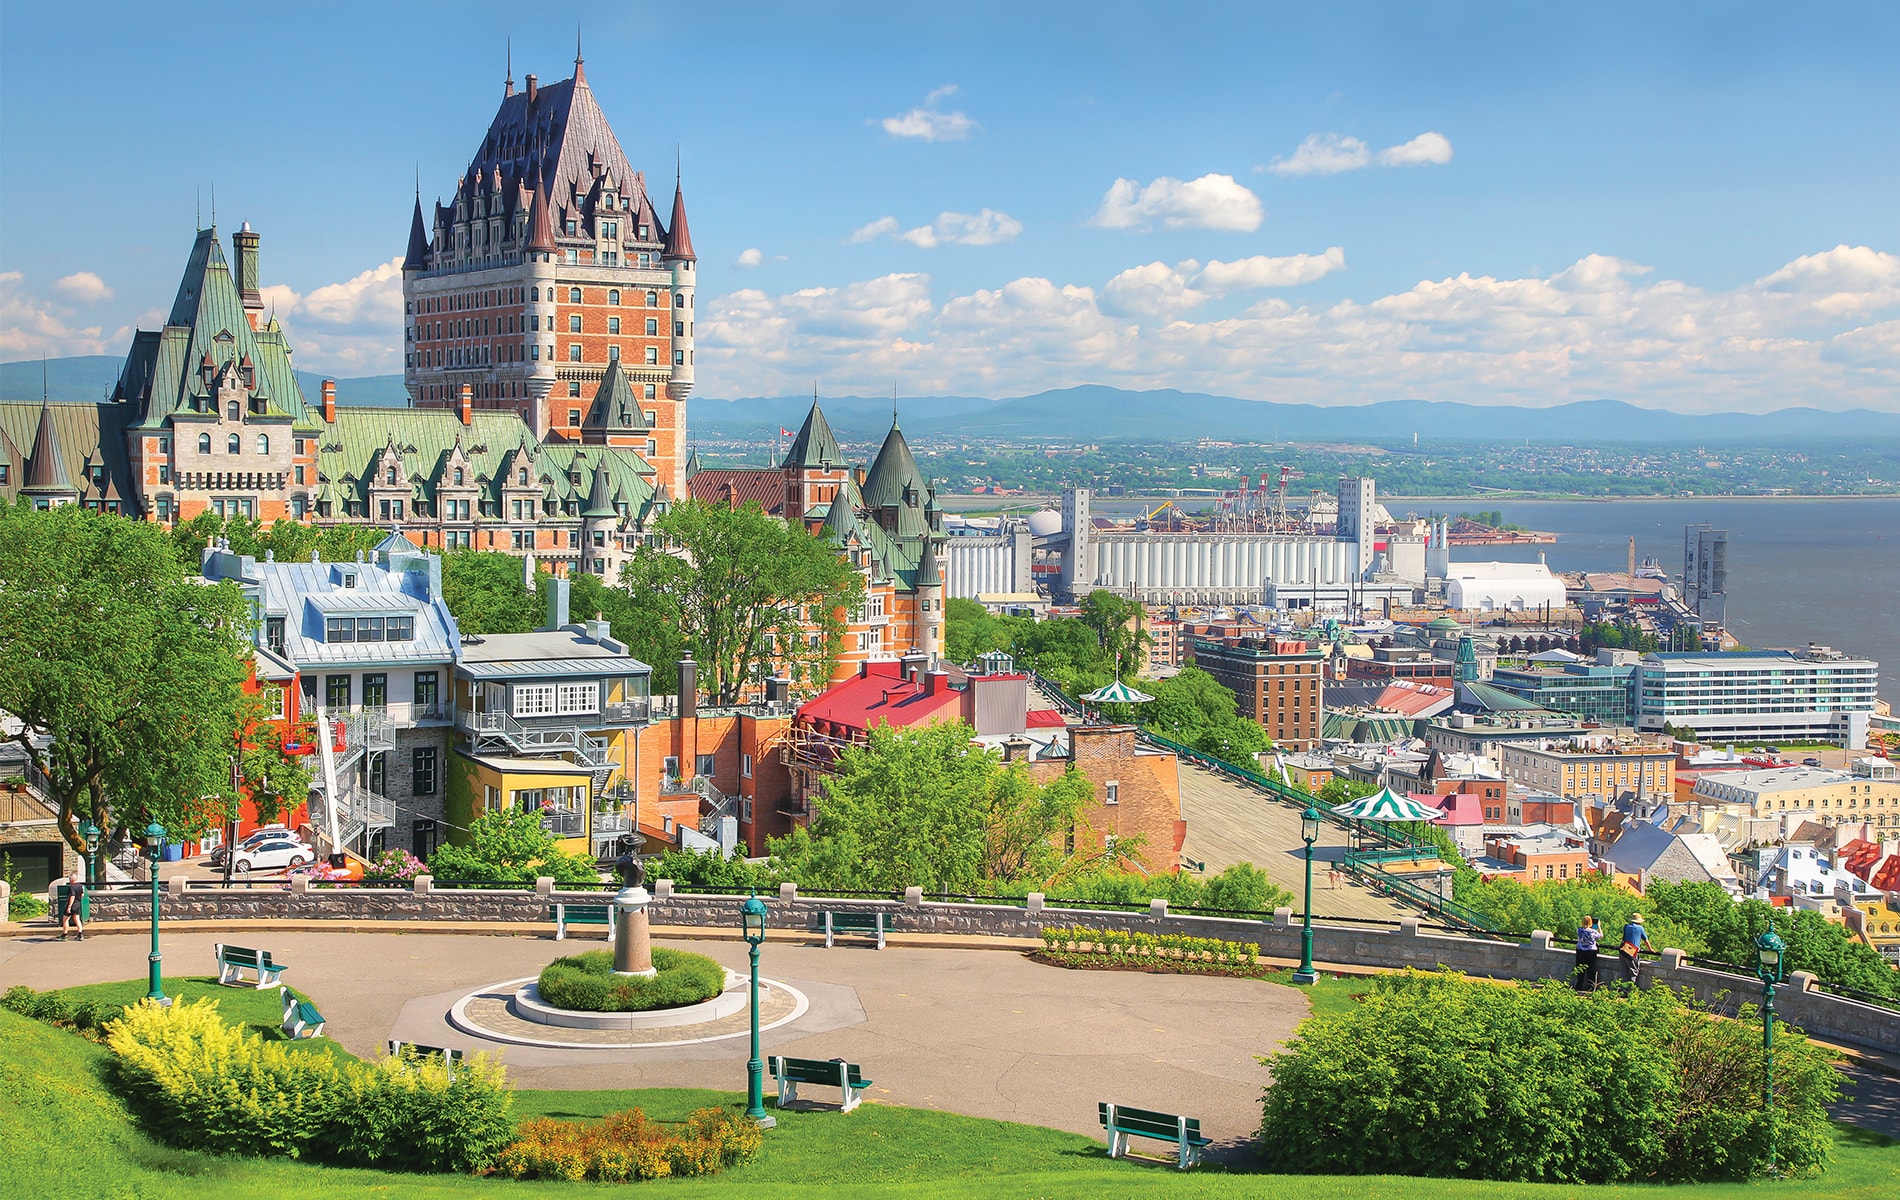 Take a stroll along the promenade for a glorious view of Château Frontenac in Old Québec City.